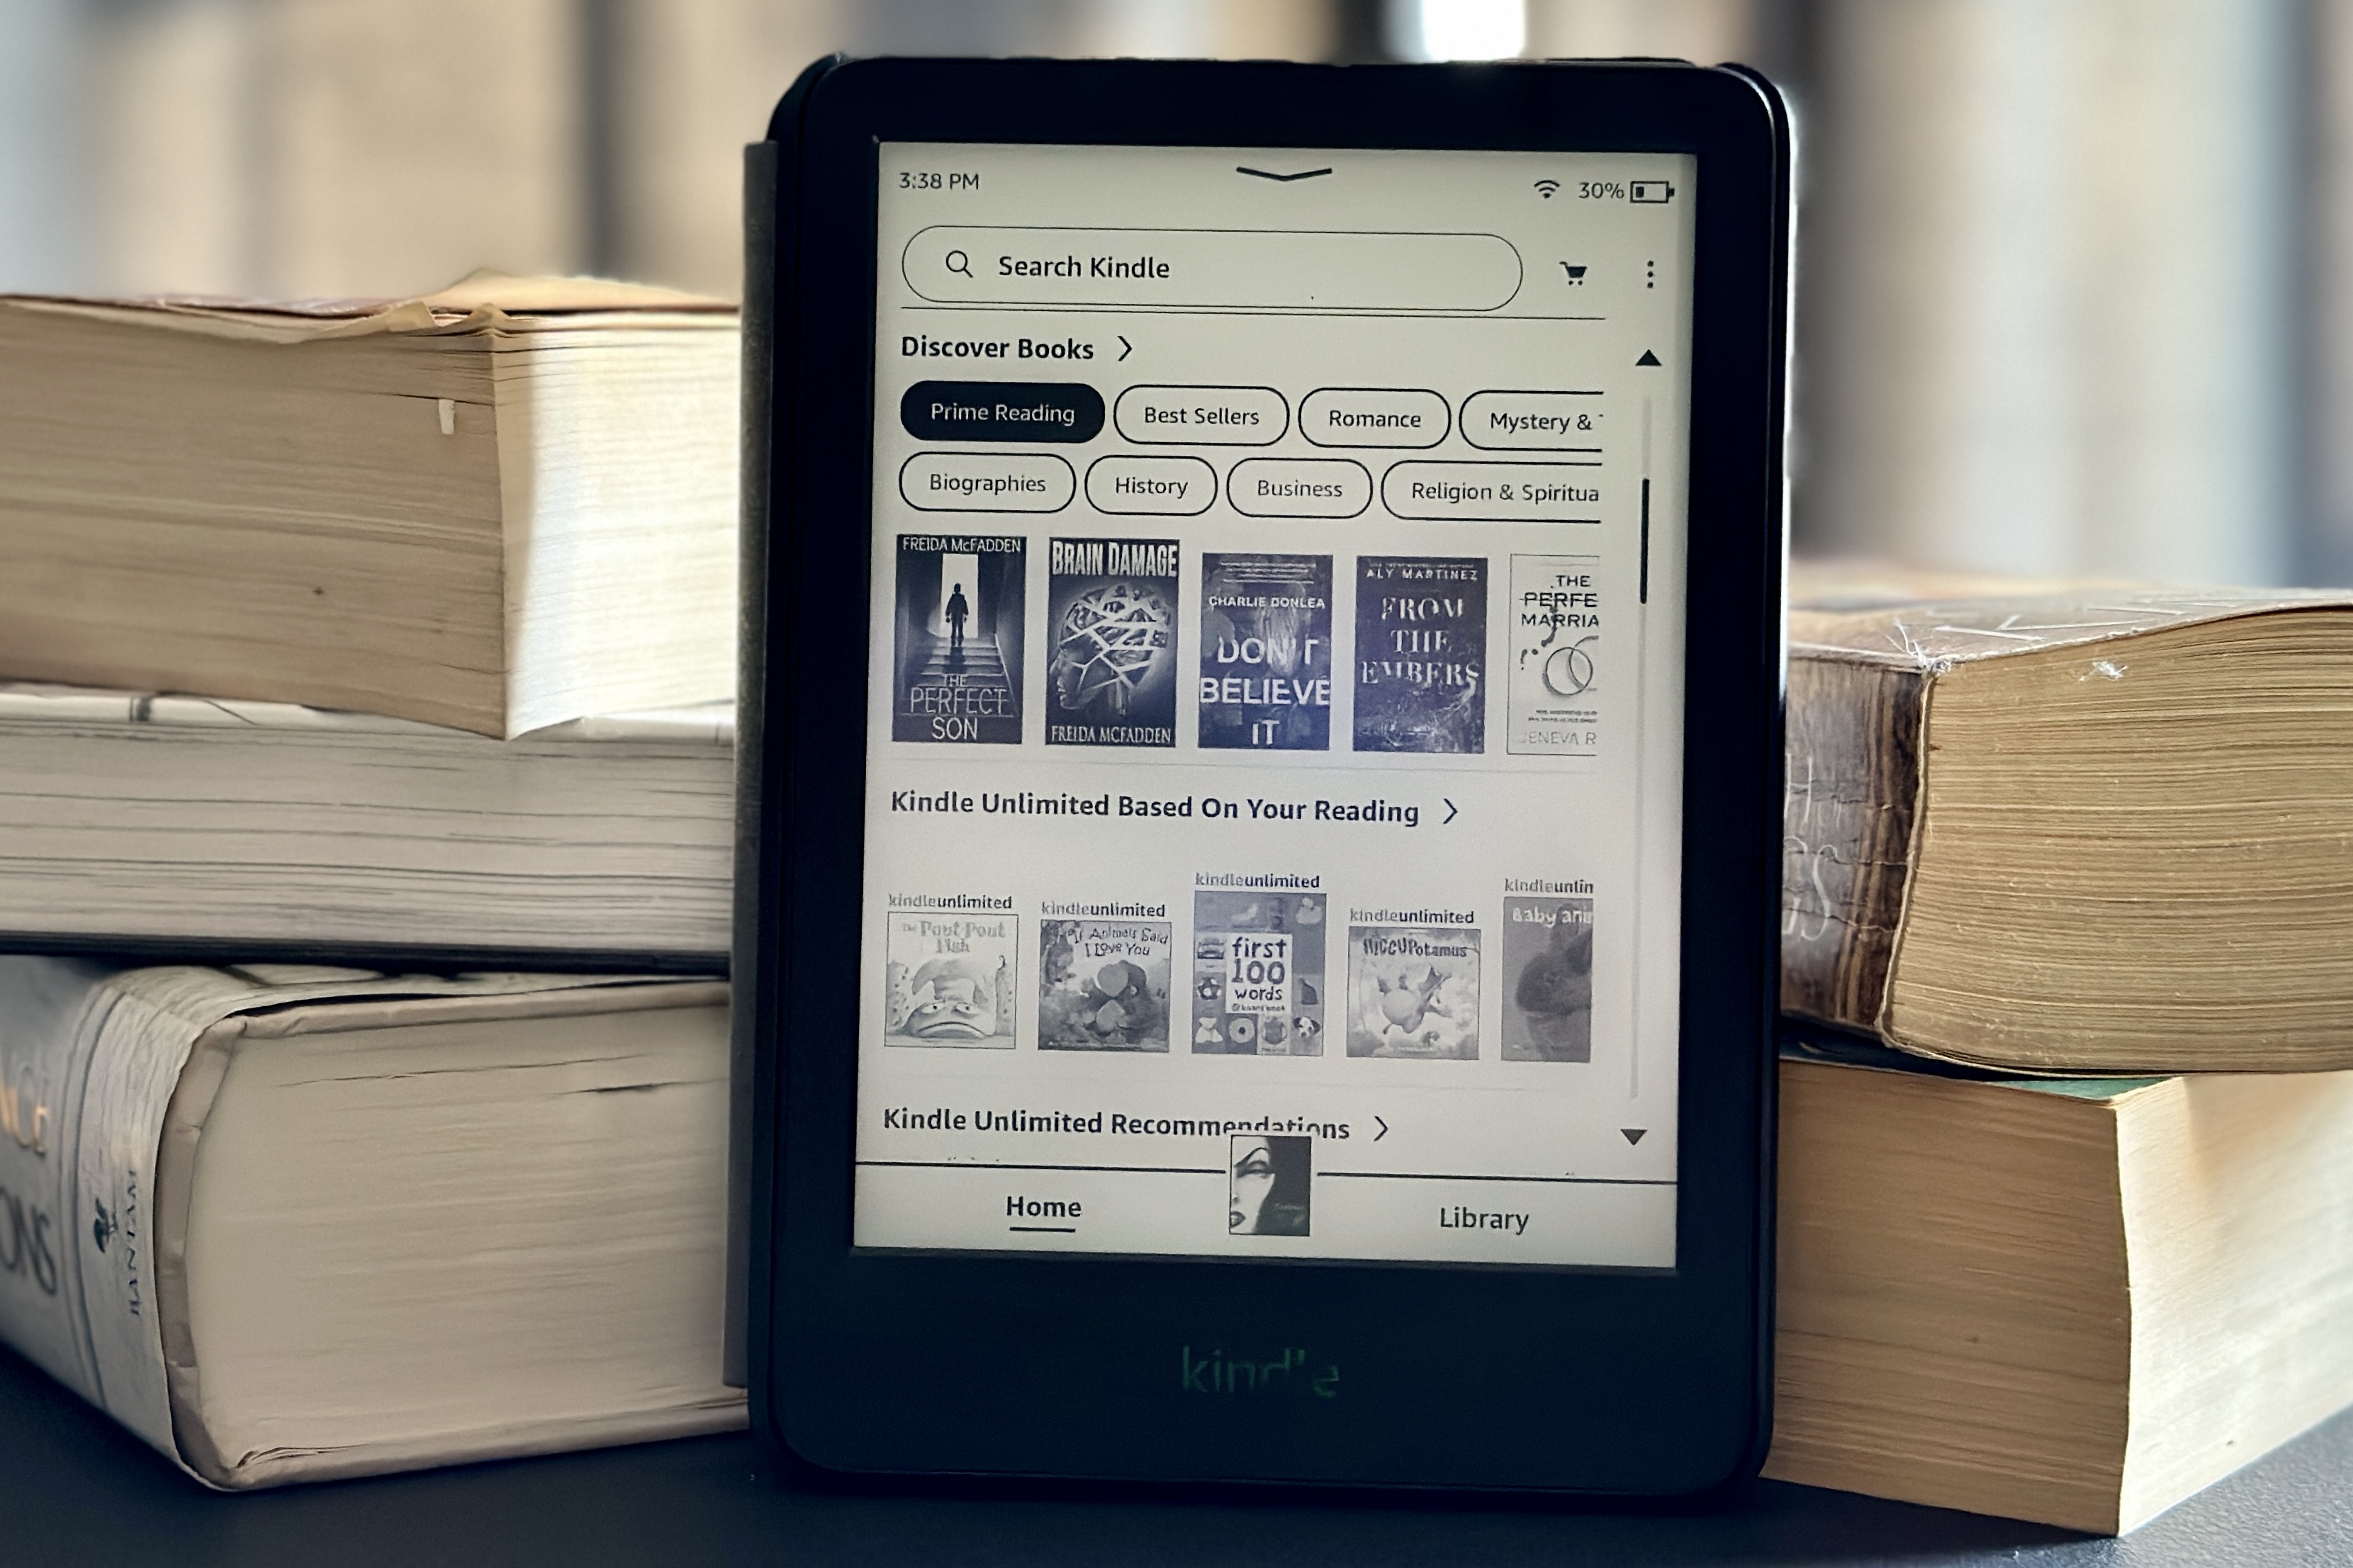 Android users will no longer be able to buy Kindle e-books from the  app